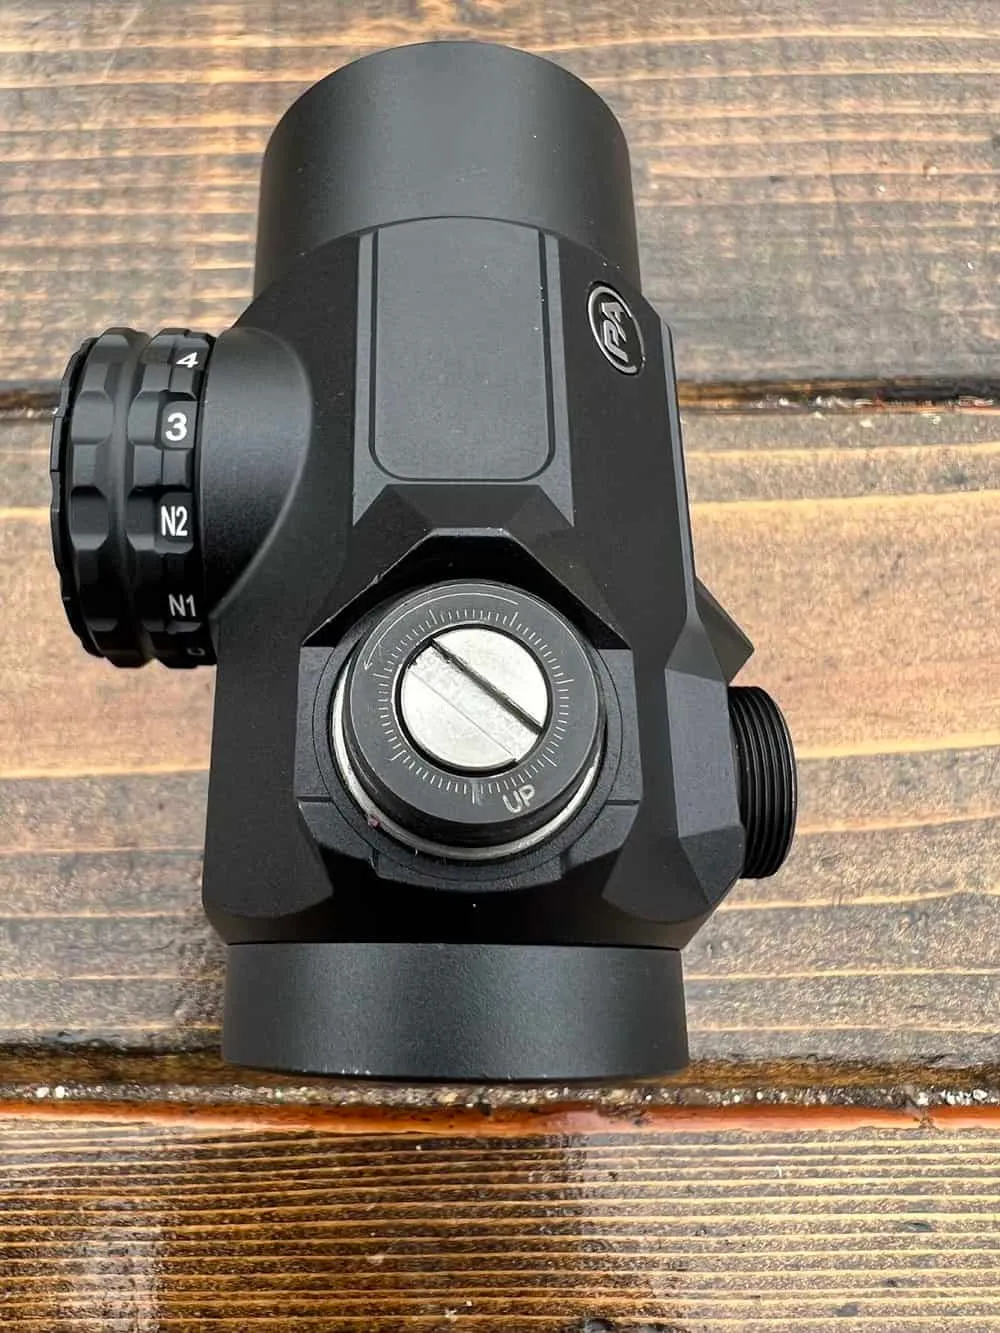 Primary Arms SLx Microdot 25 Gen 2 controls from above